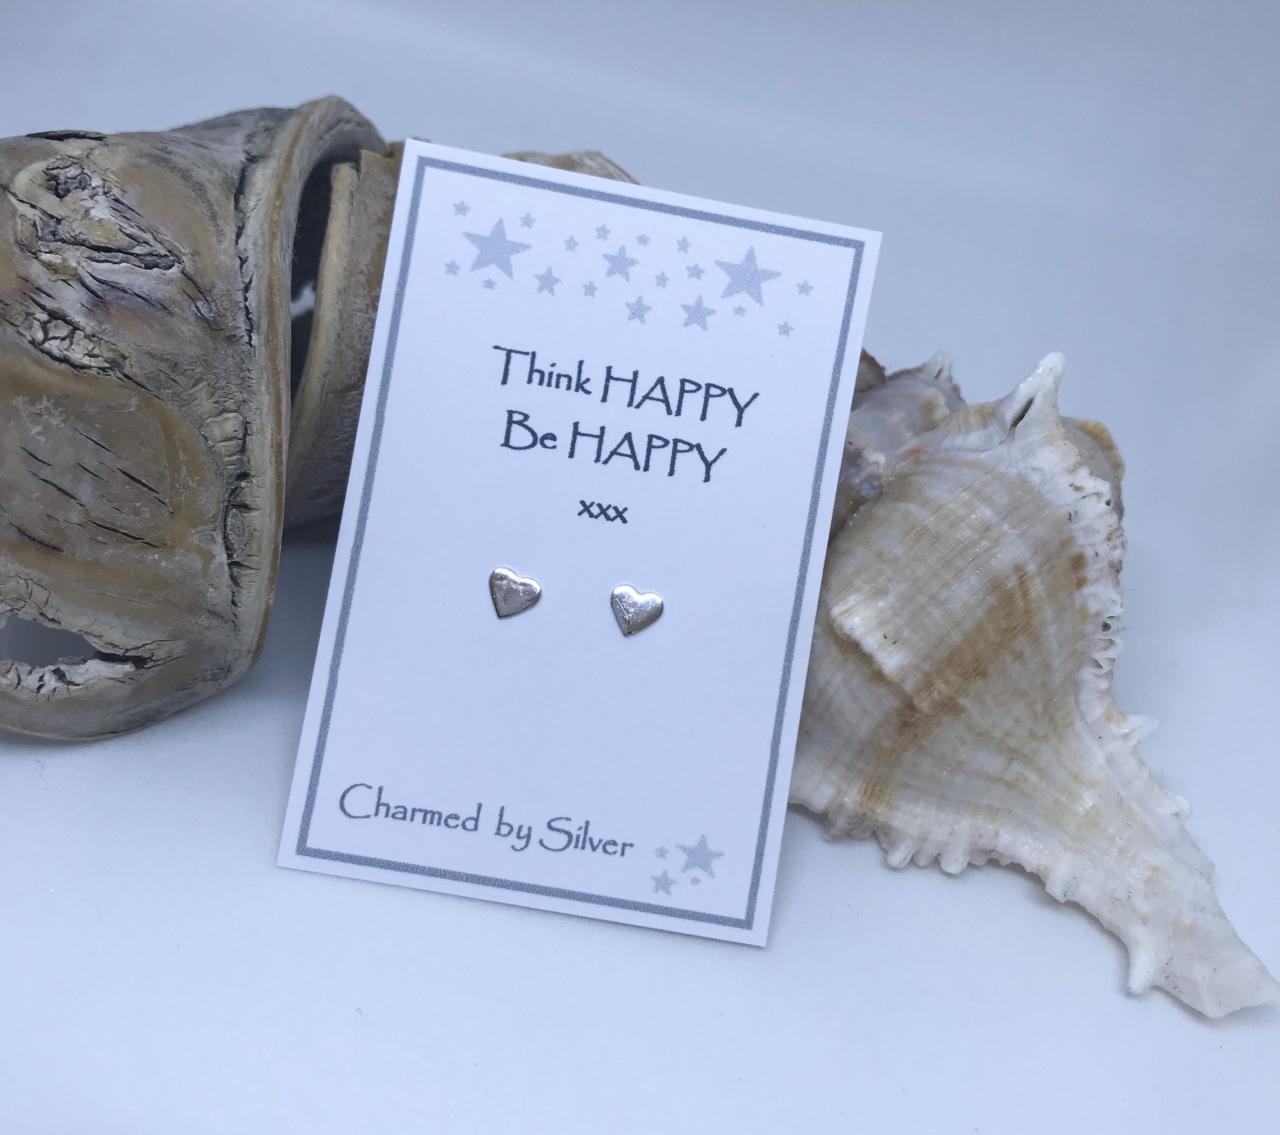 Sterling Silver Heart Earrings With A Happy Message